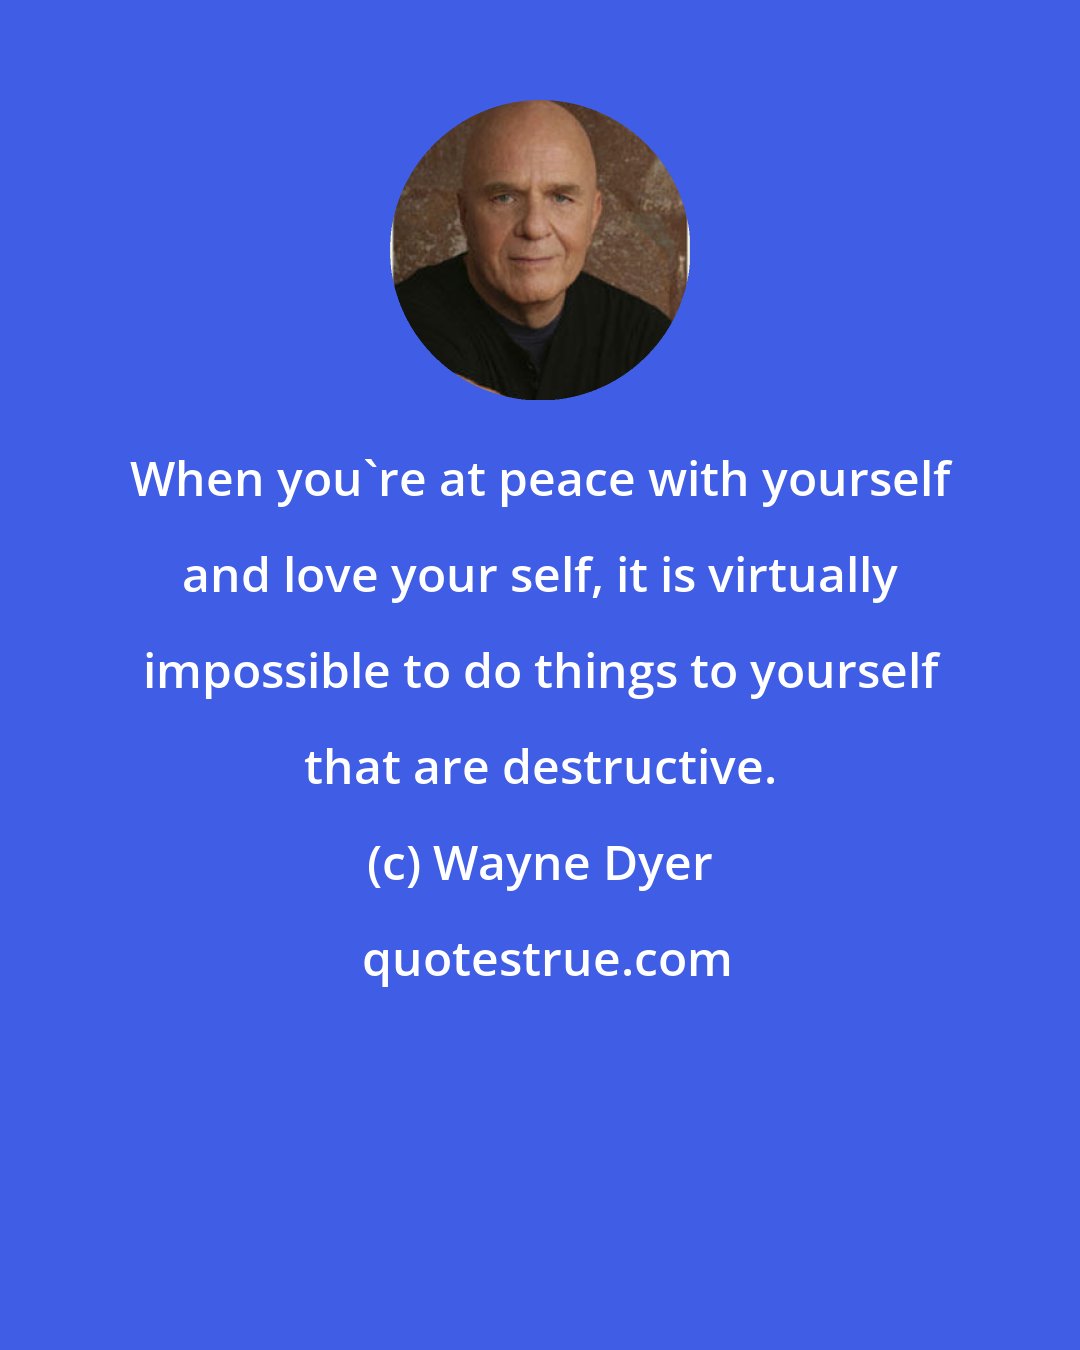 Wayne Dyer: When you're at peace with yourself and love your self, it is virtually impossible to do things to yourself that are destructive.